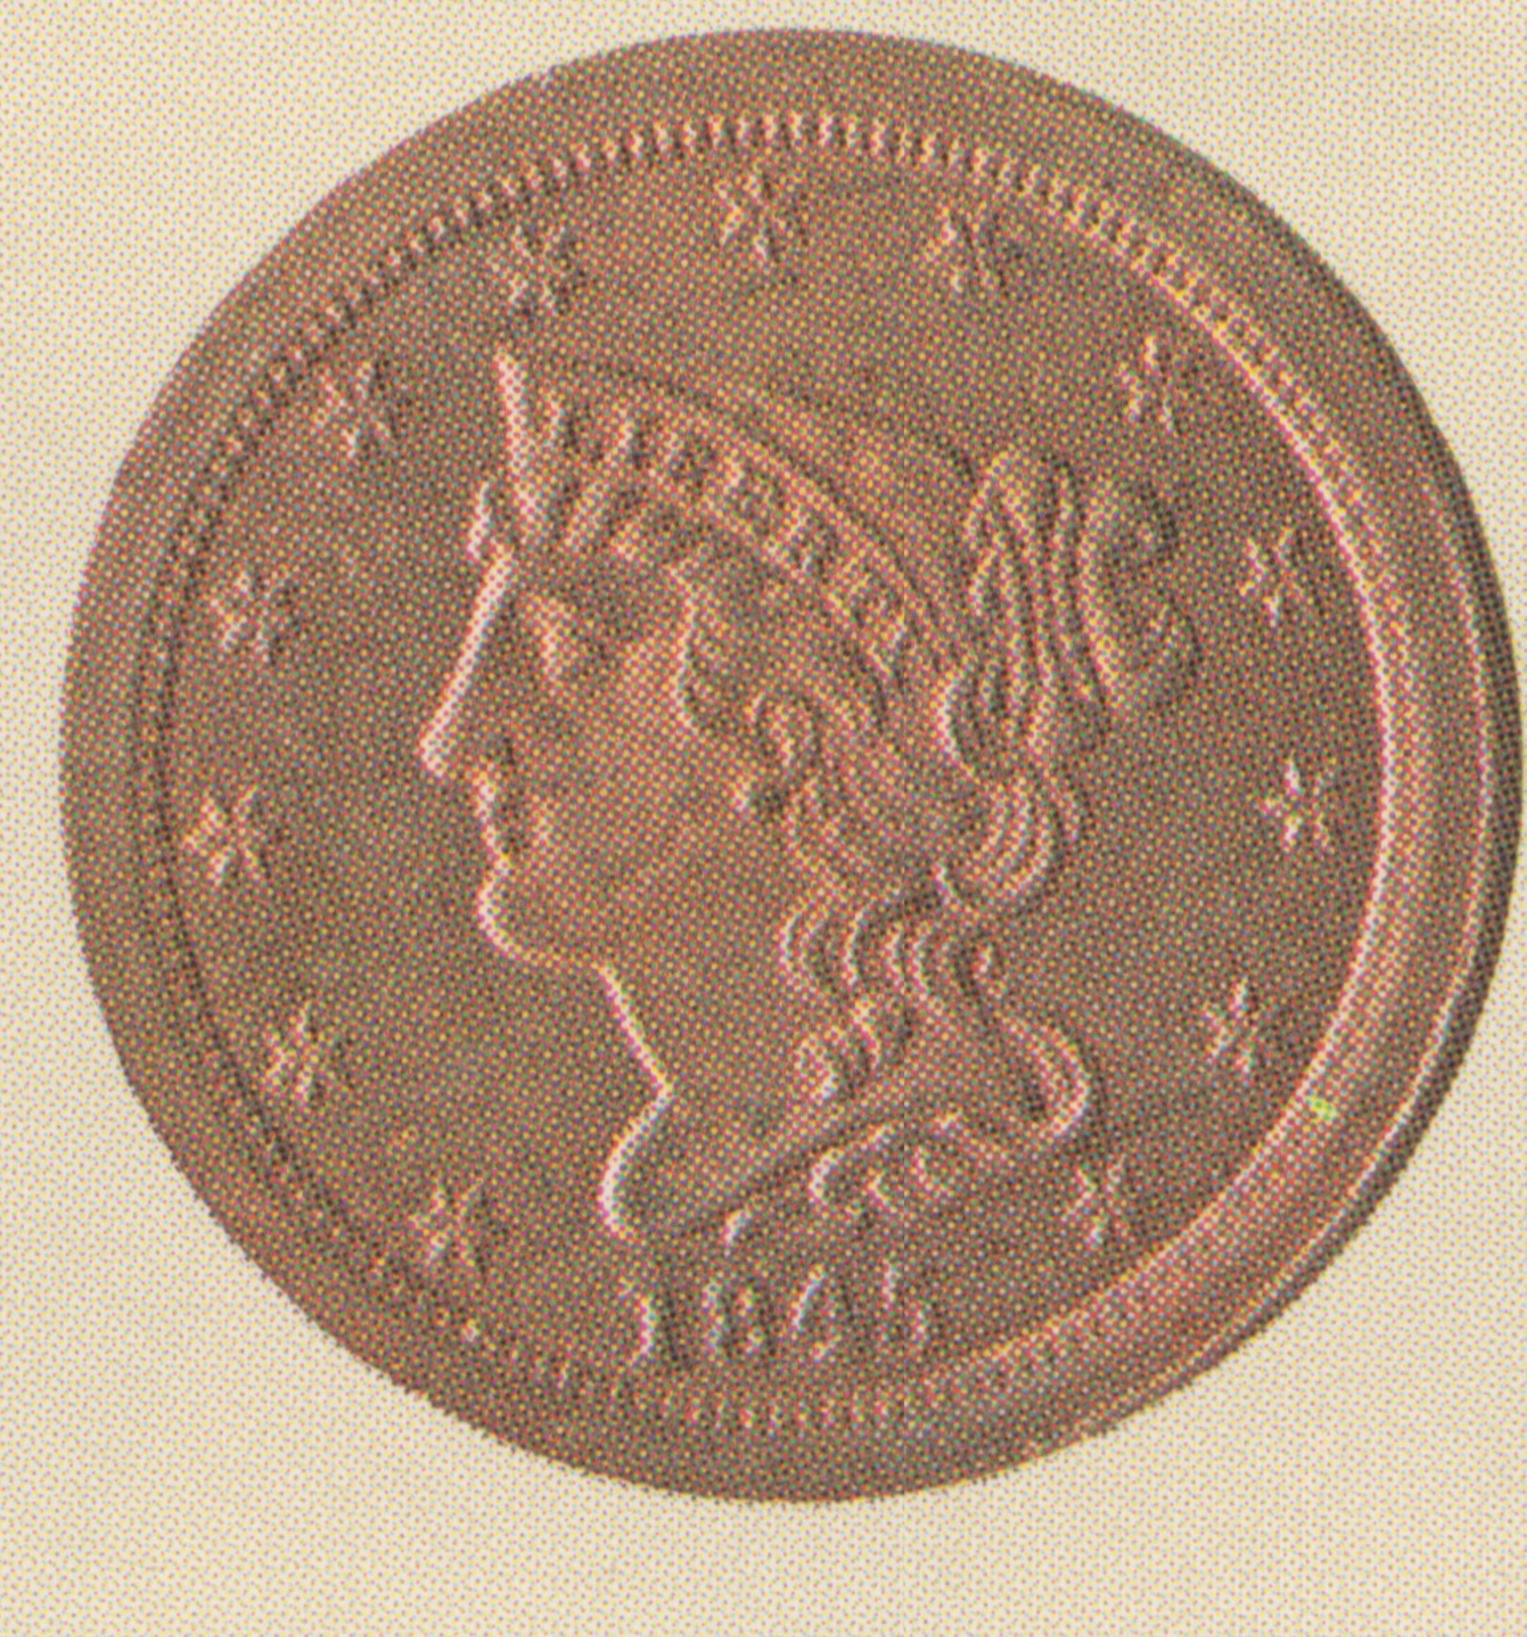 Close-up of half-cent coin dated 1845